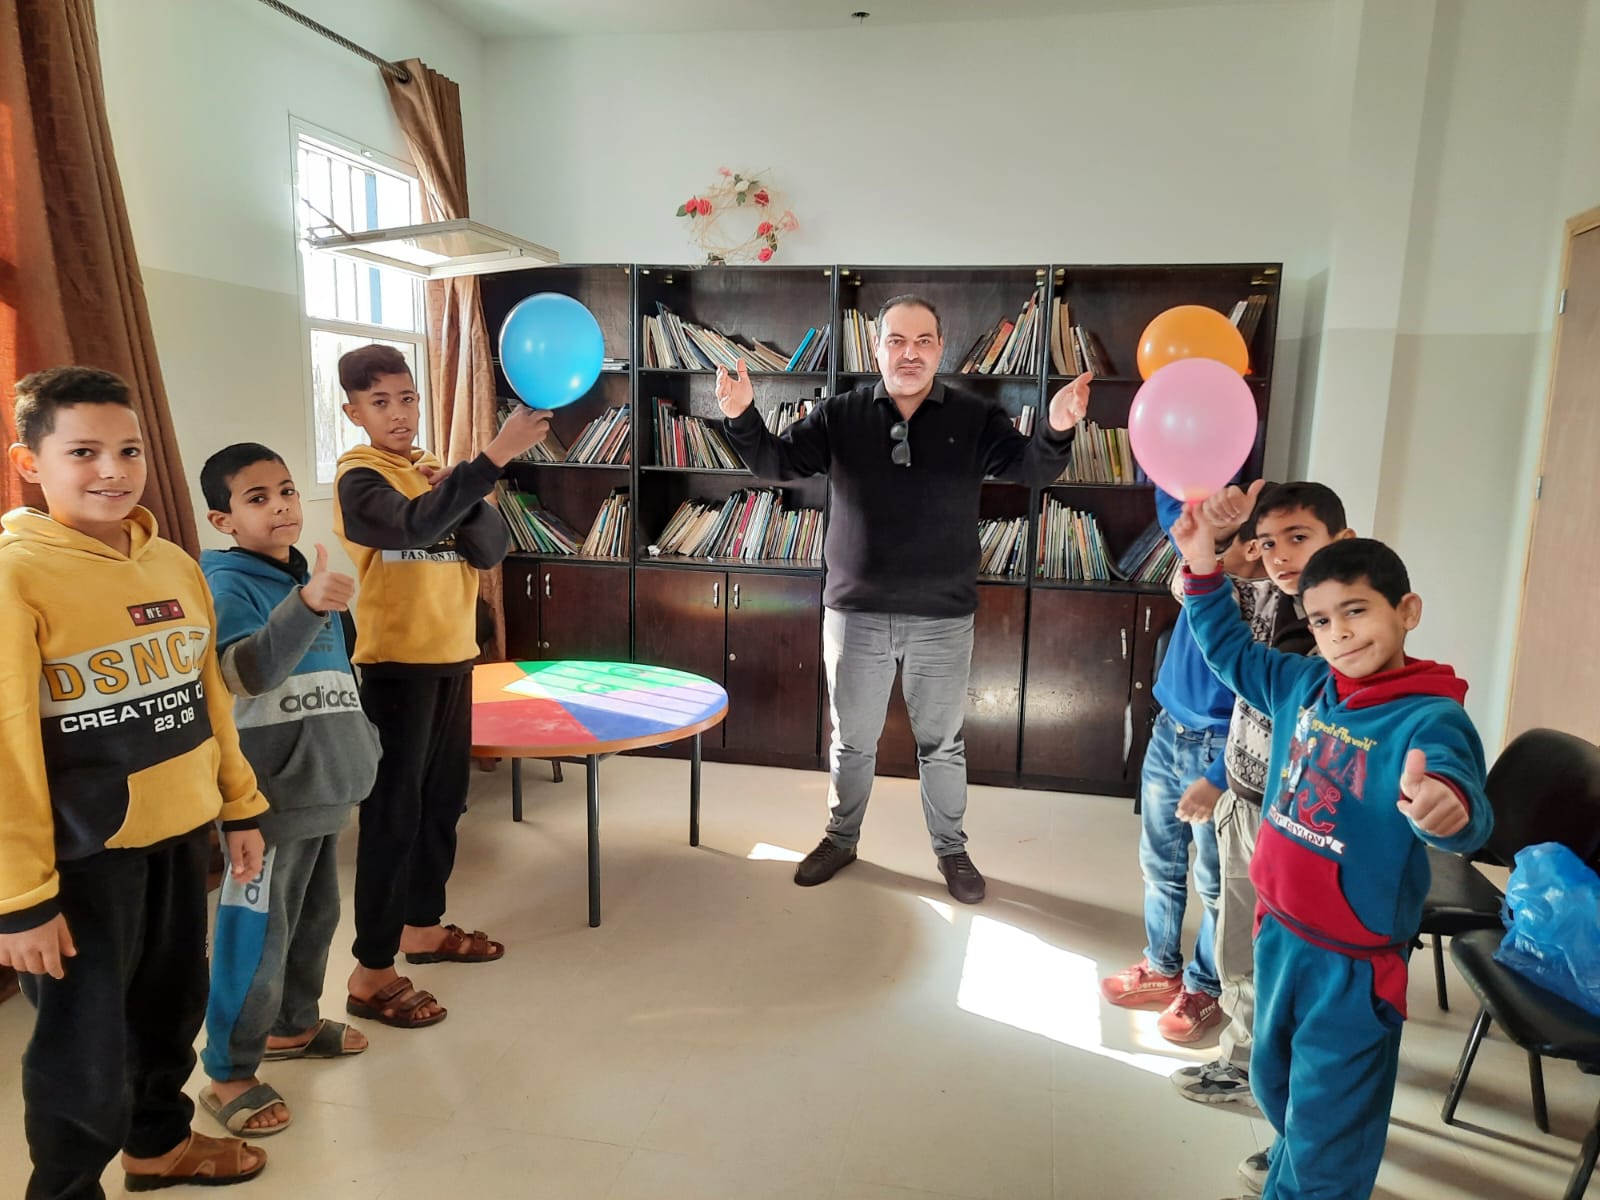 photo showing a group session with children holding balloons and an adult facilitator